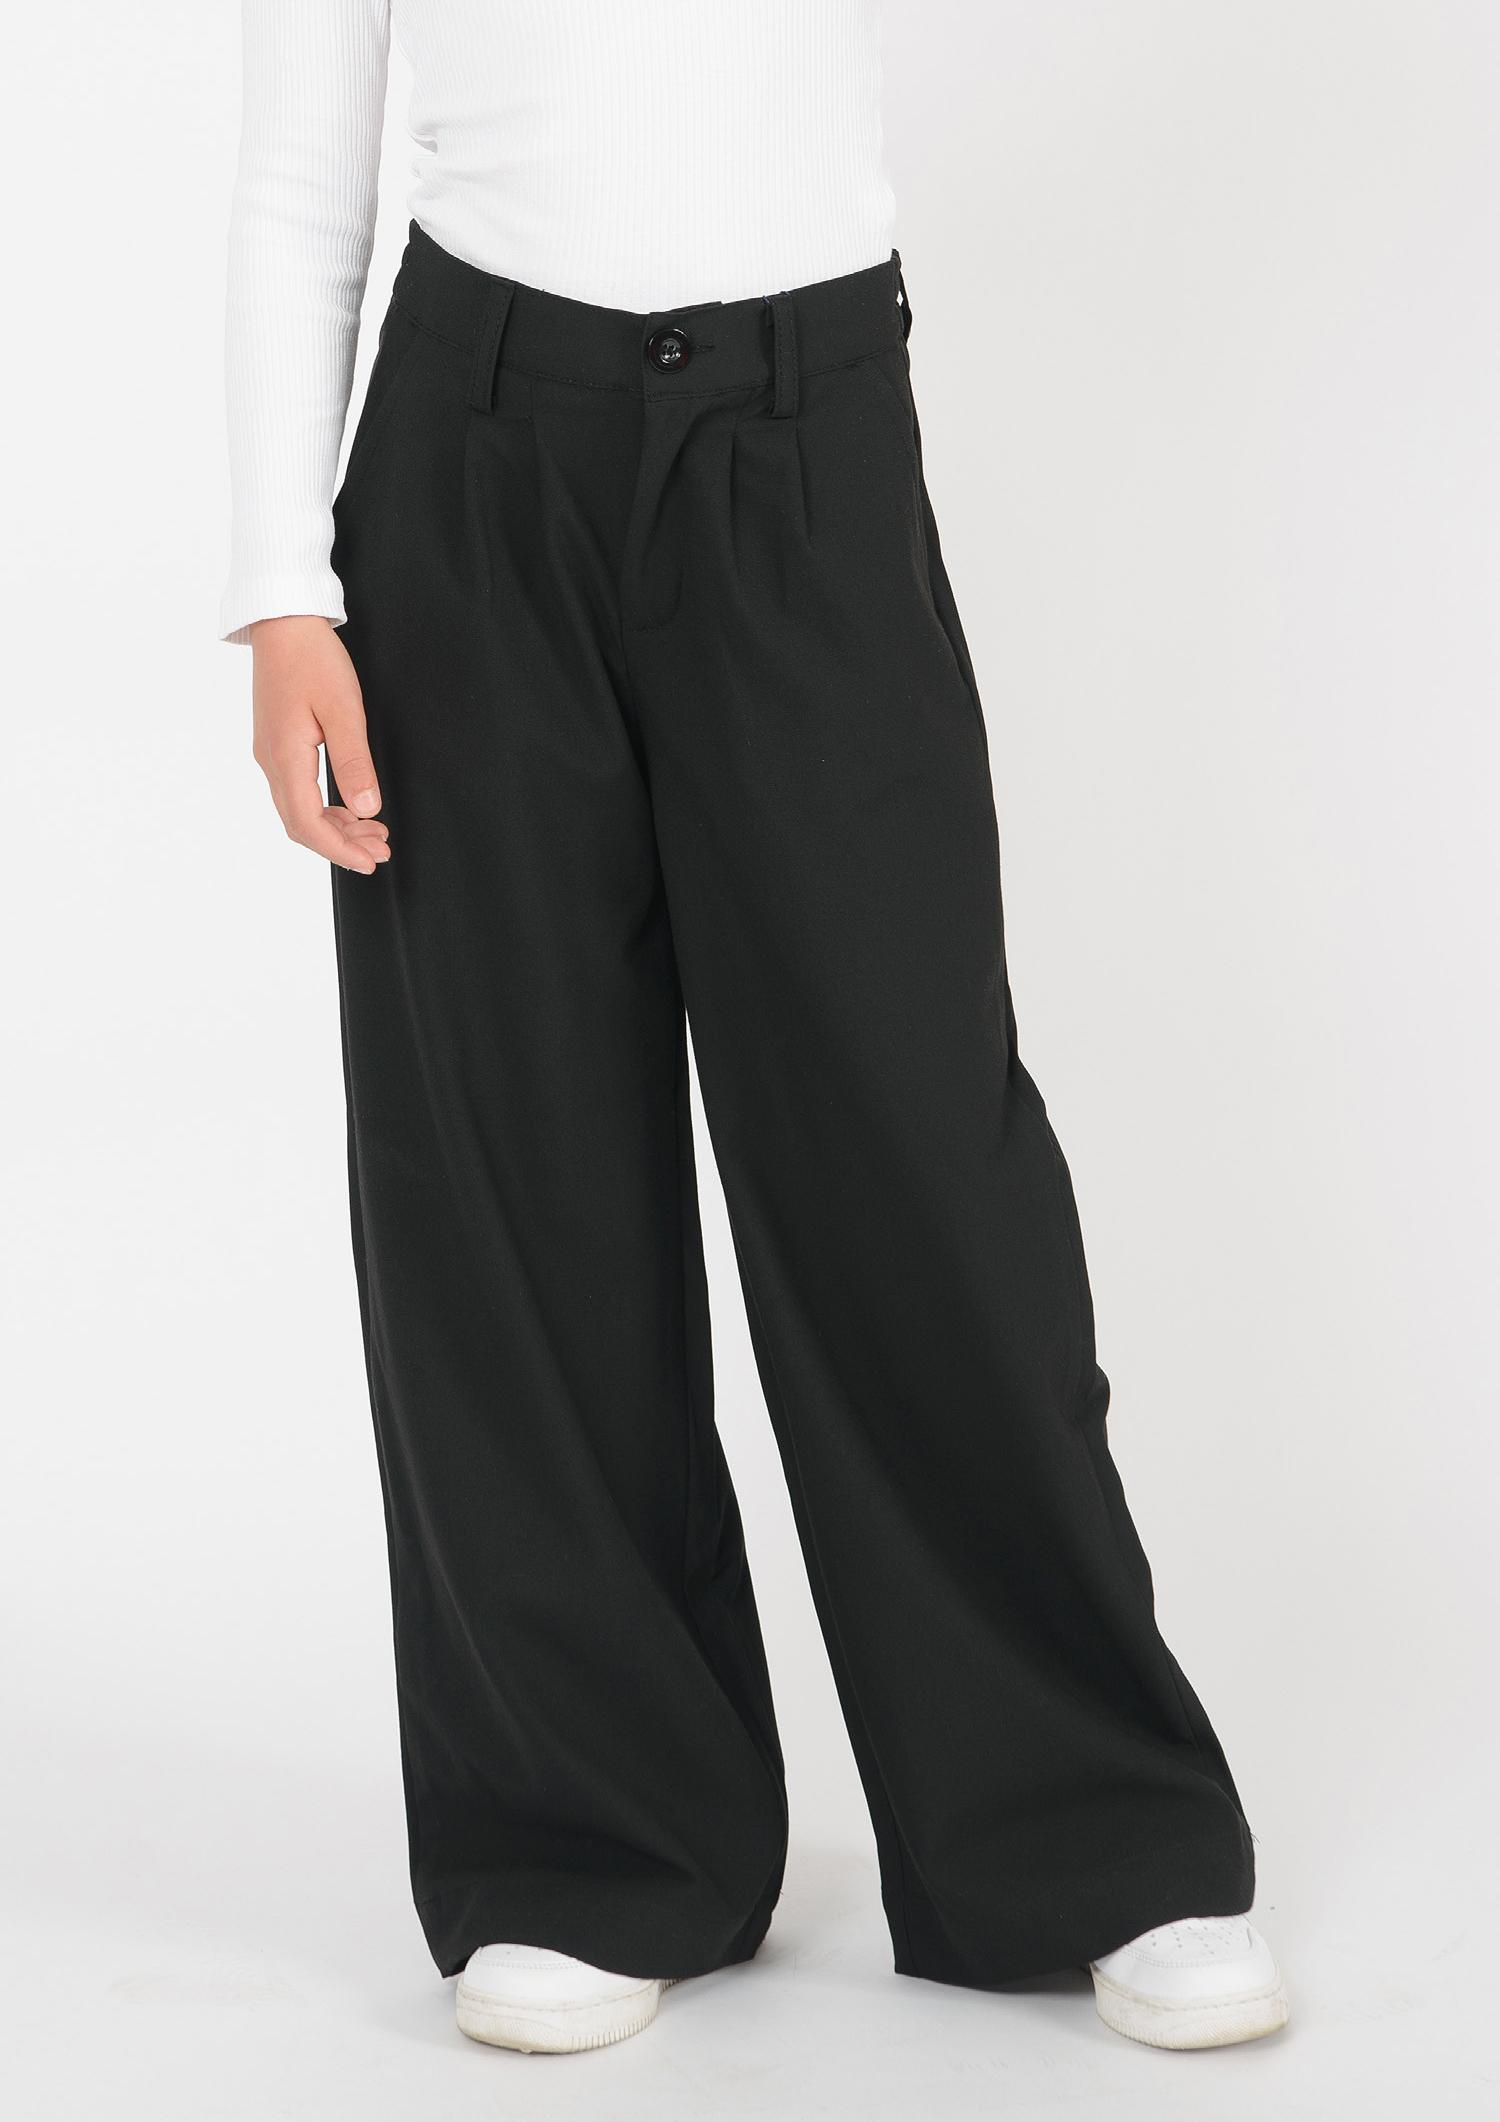 1370-Girls Wide Leg Pant available in normal, slim